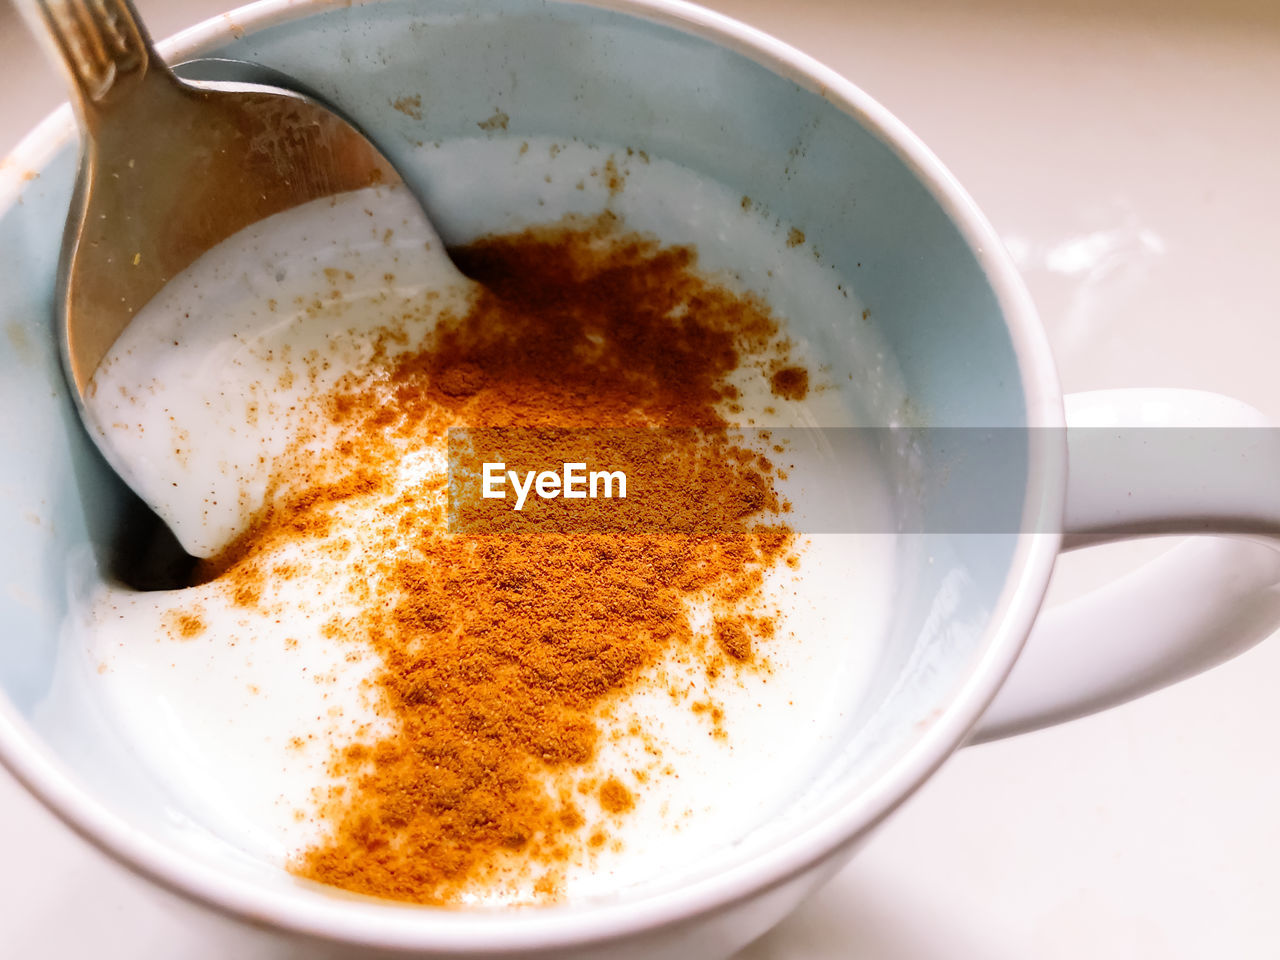 Kefir with cinnamon in a mug for boost the immune system. immunological and stomach benefits